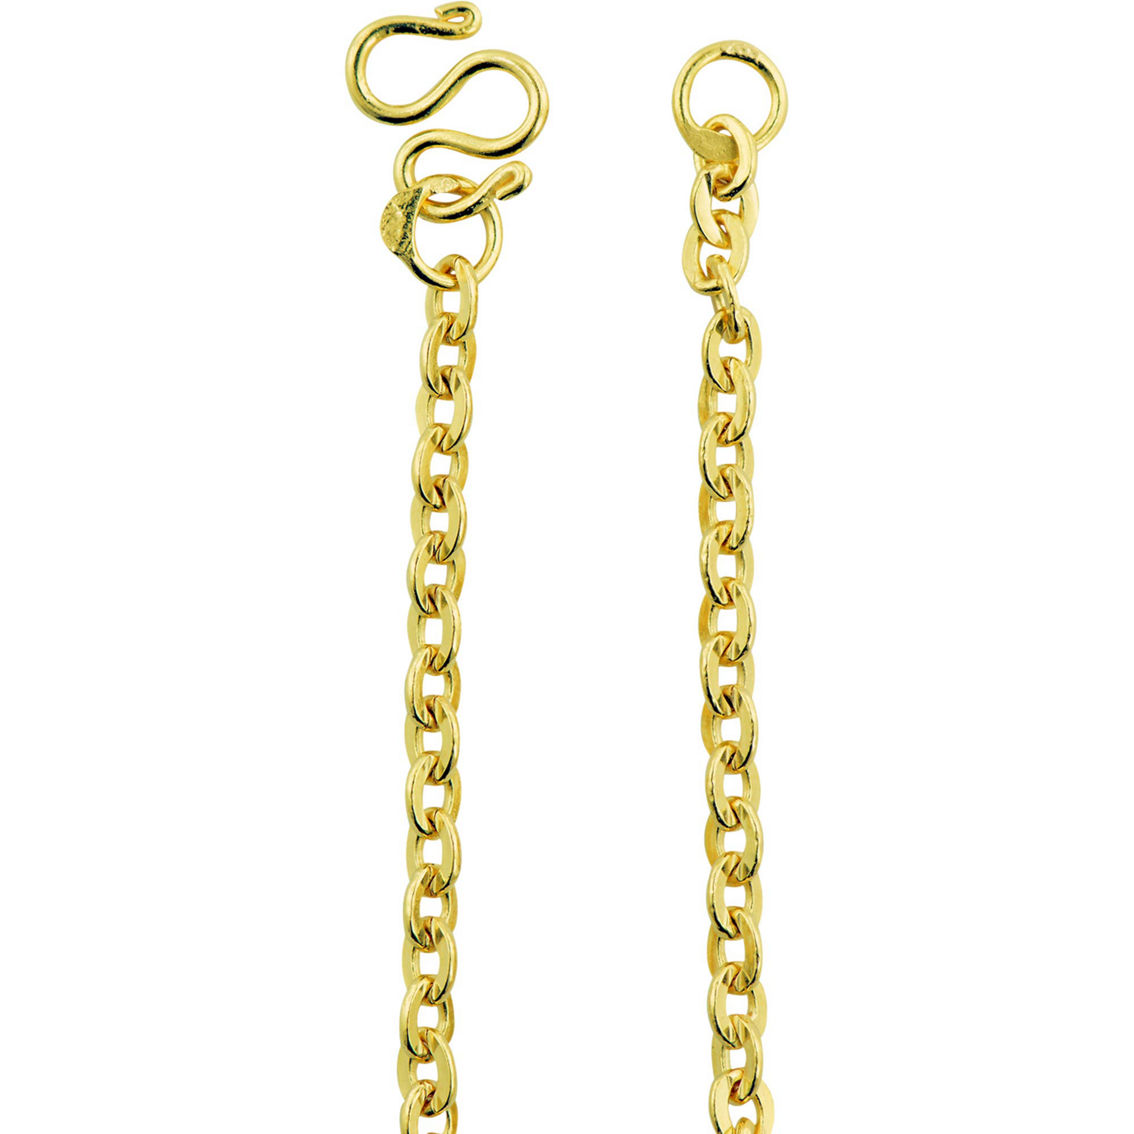 Robert Manse Designs 23K 1/2 Thai Baht Yellow Gold Puff Rolo Chain 21.5 in. - Image 2 of 2